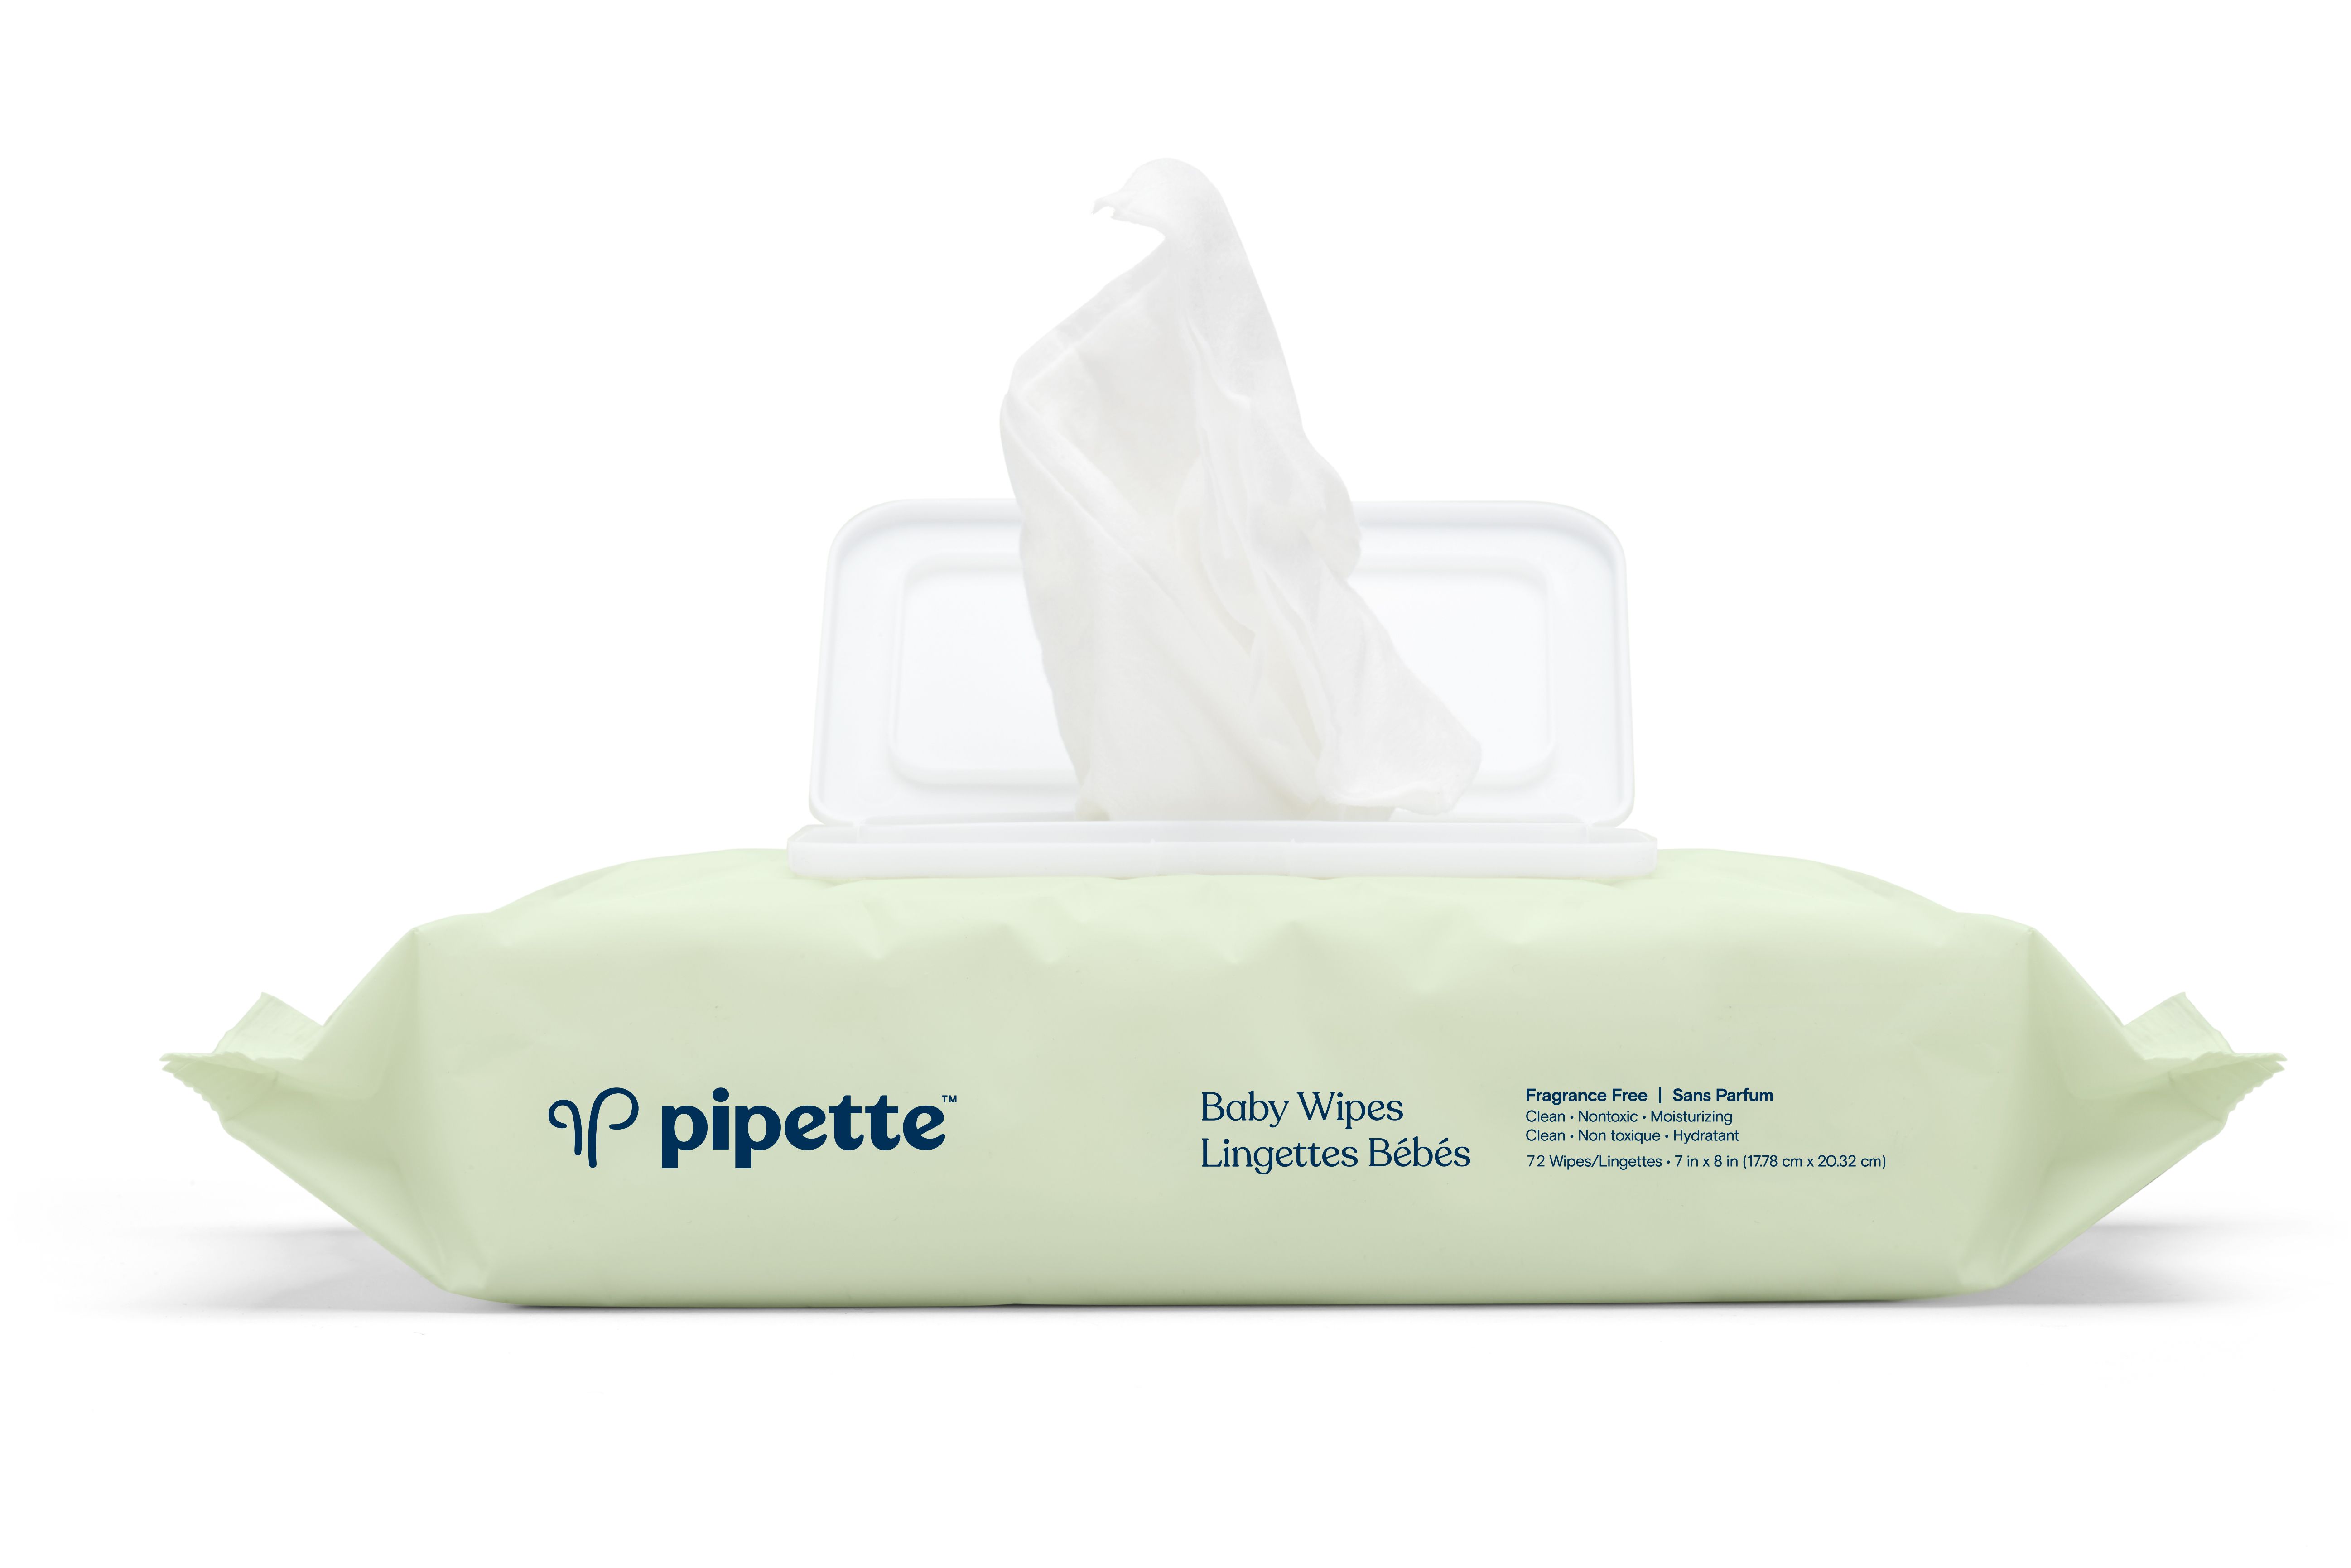 DISCPipette Baby Wipes, 4 pack - 288 ct